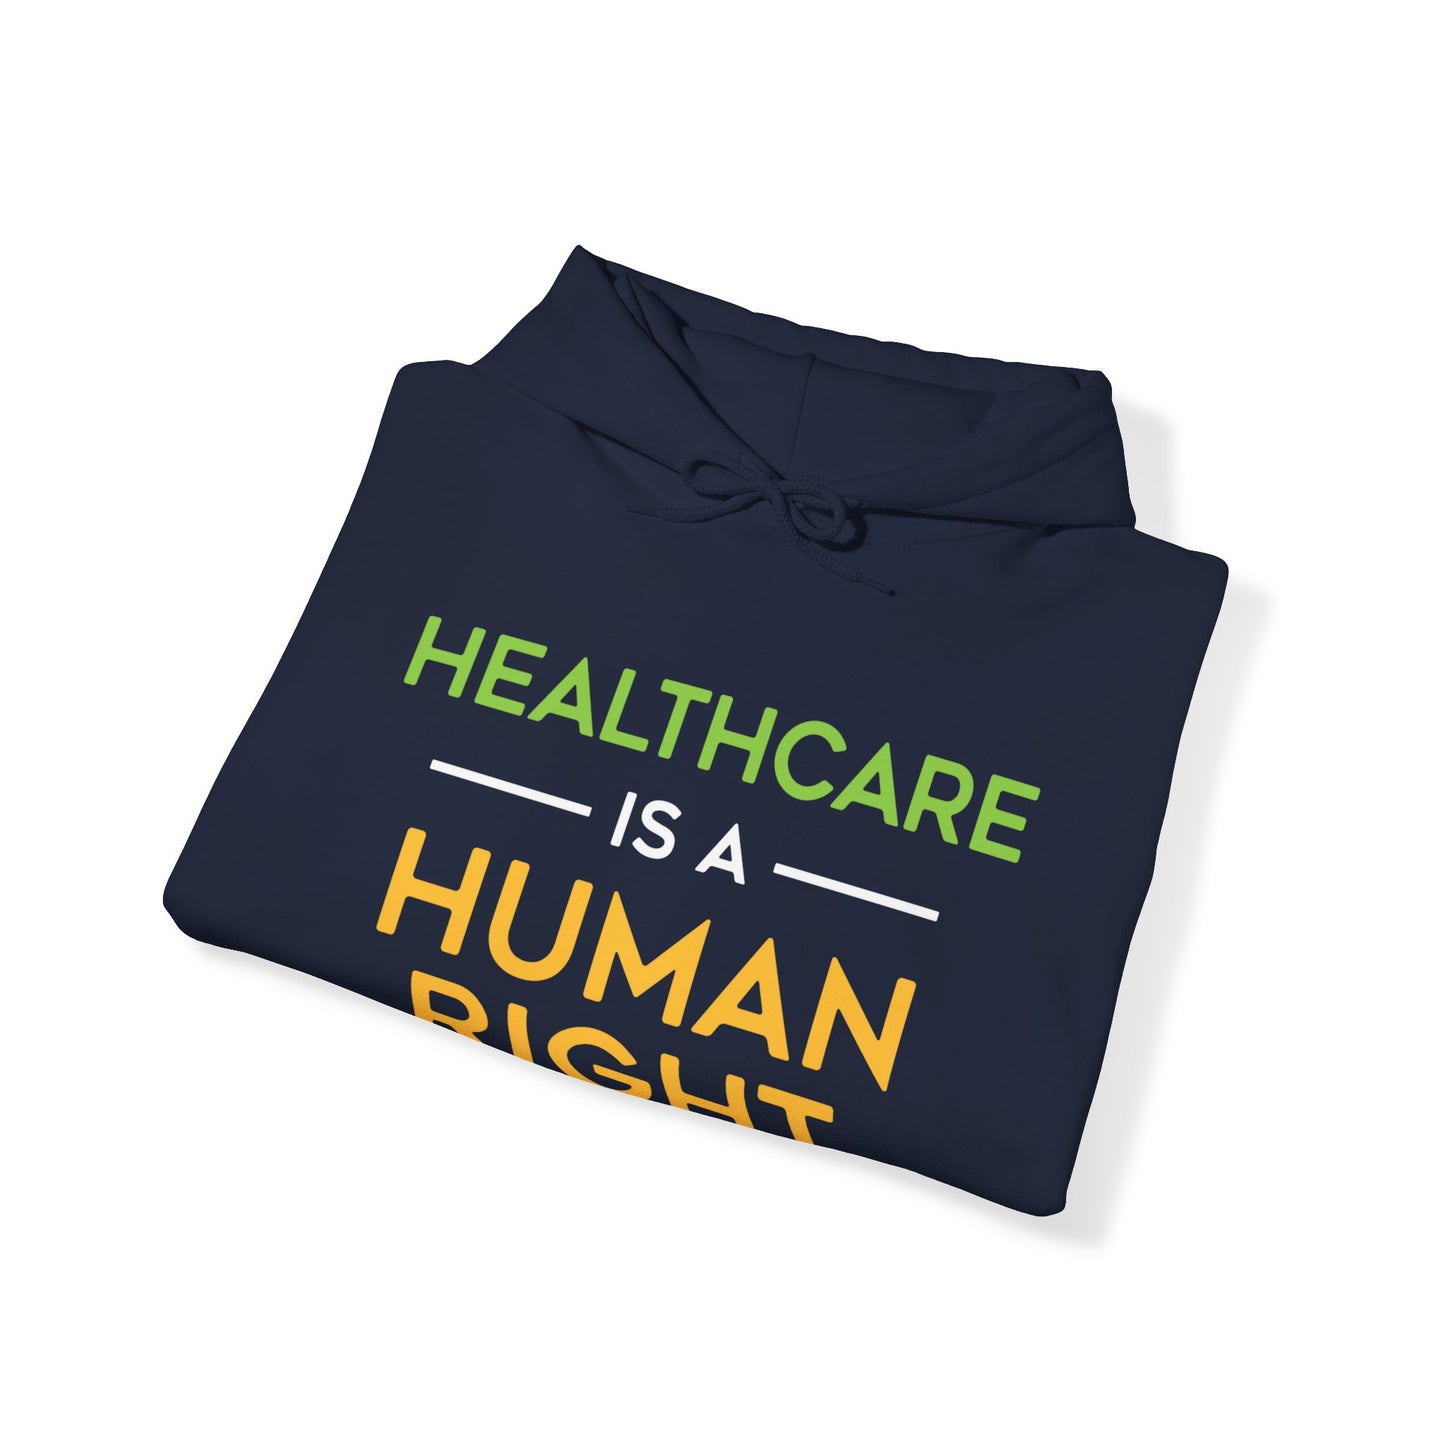 “Healthcare Is A Human Right” Unisex Hoodie